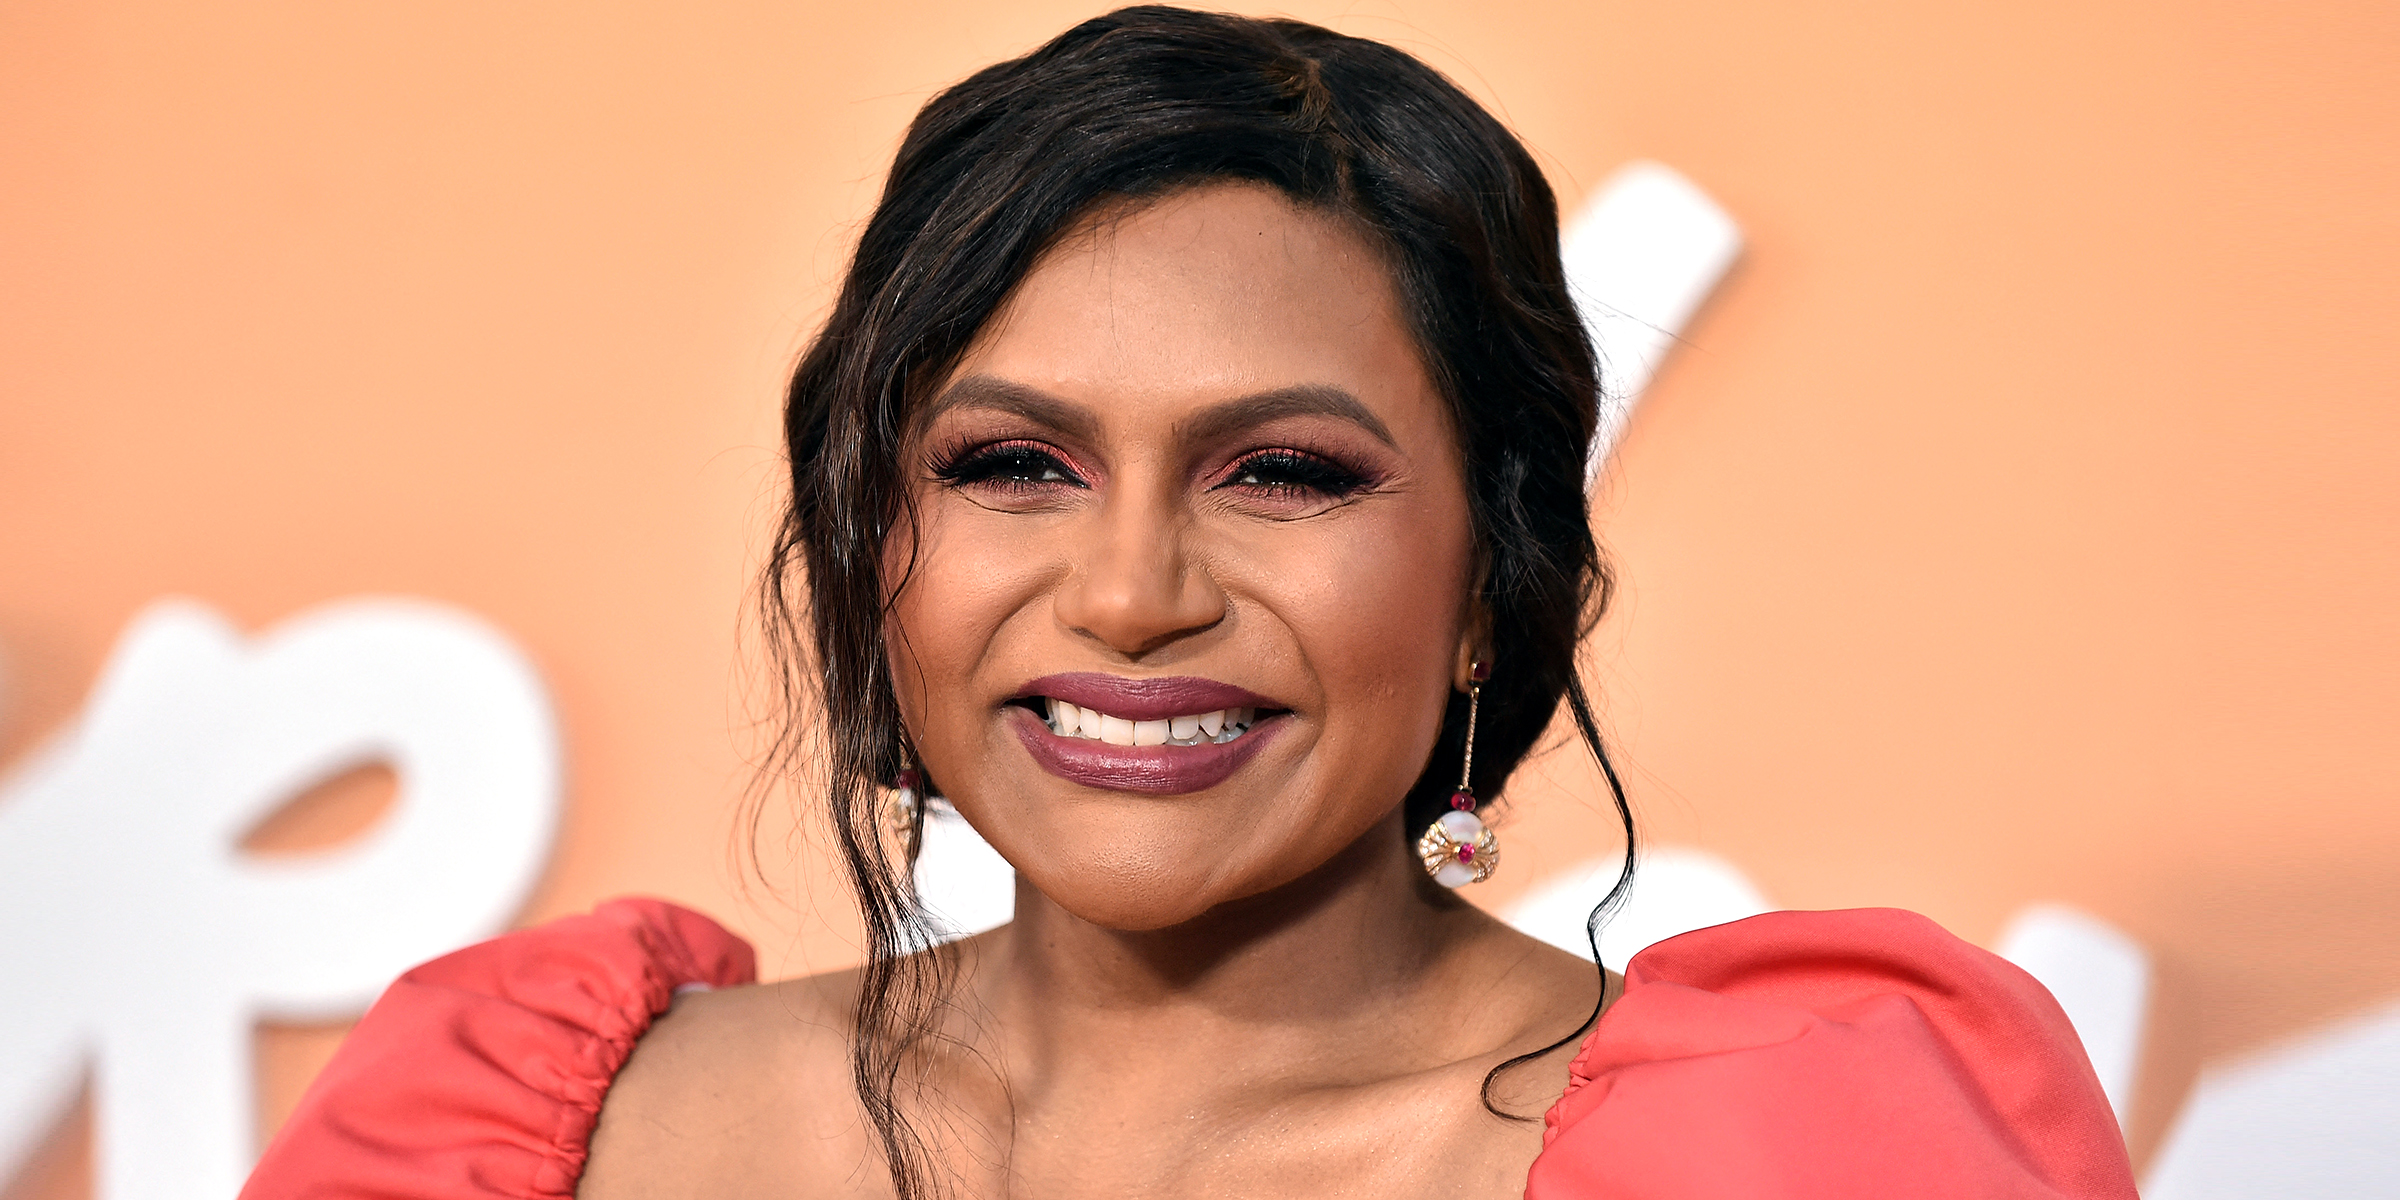 Actress and producer Mindy Kaling. | Source: Getty Images